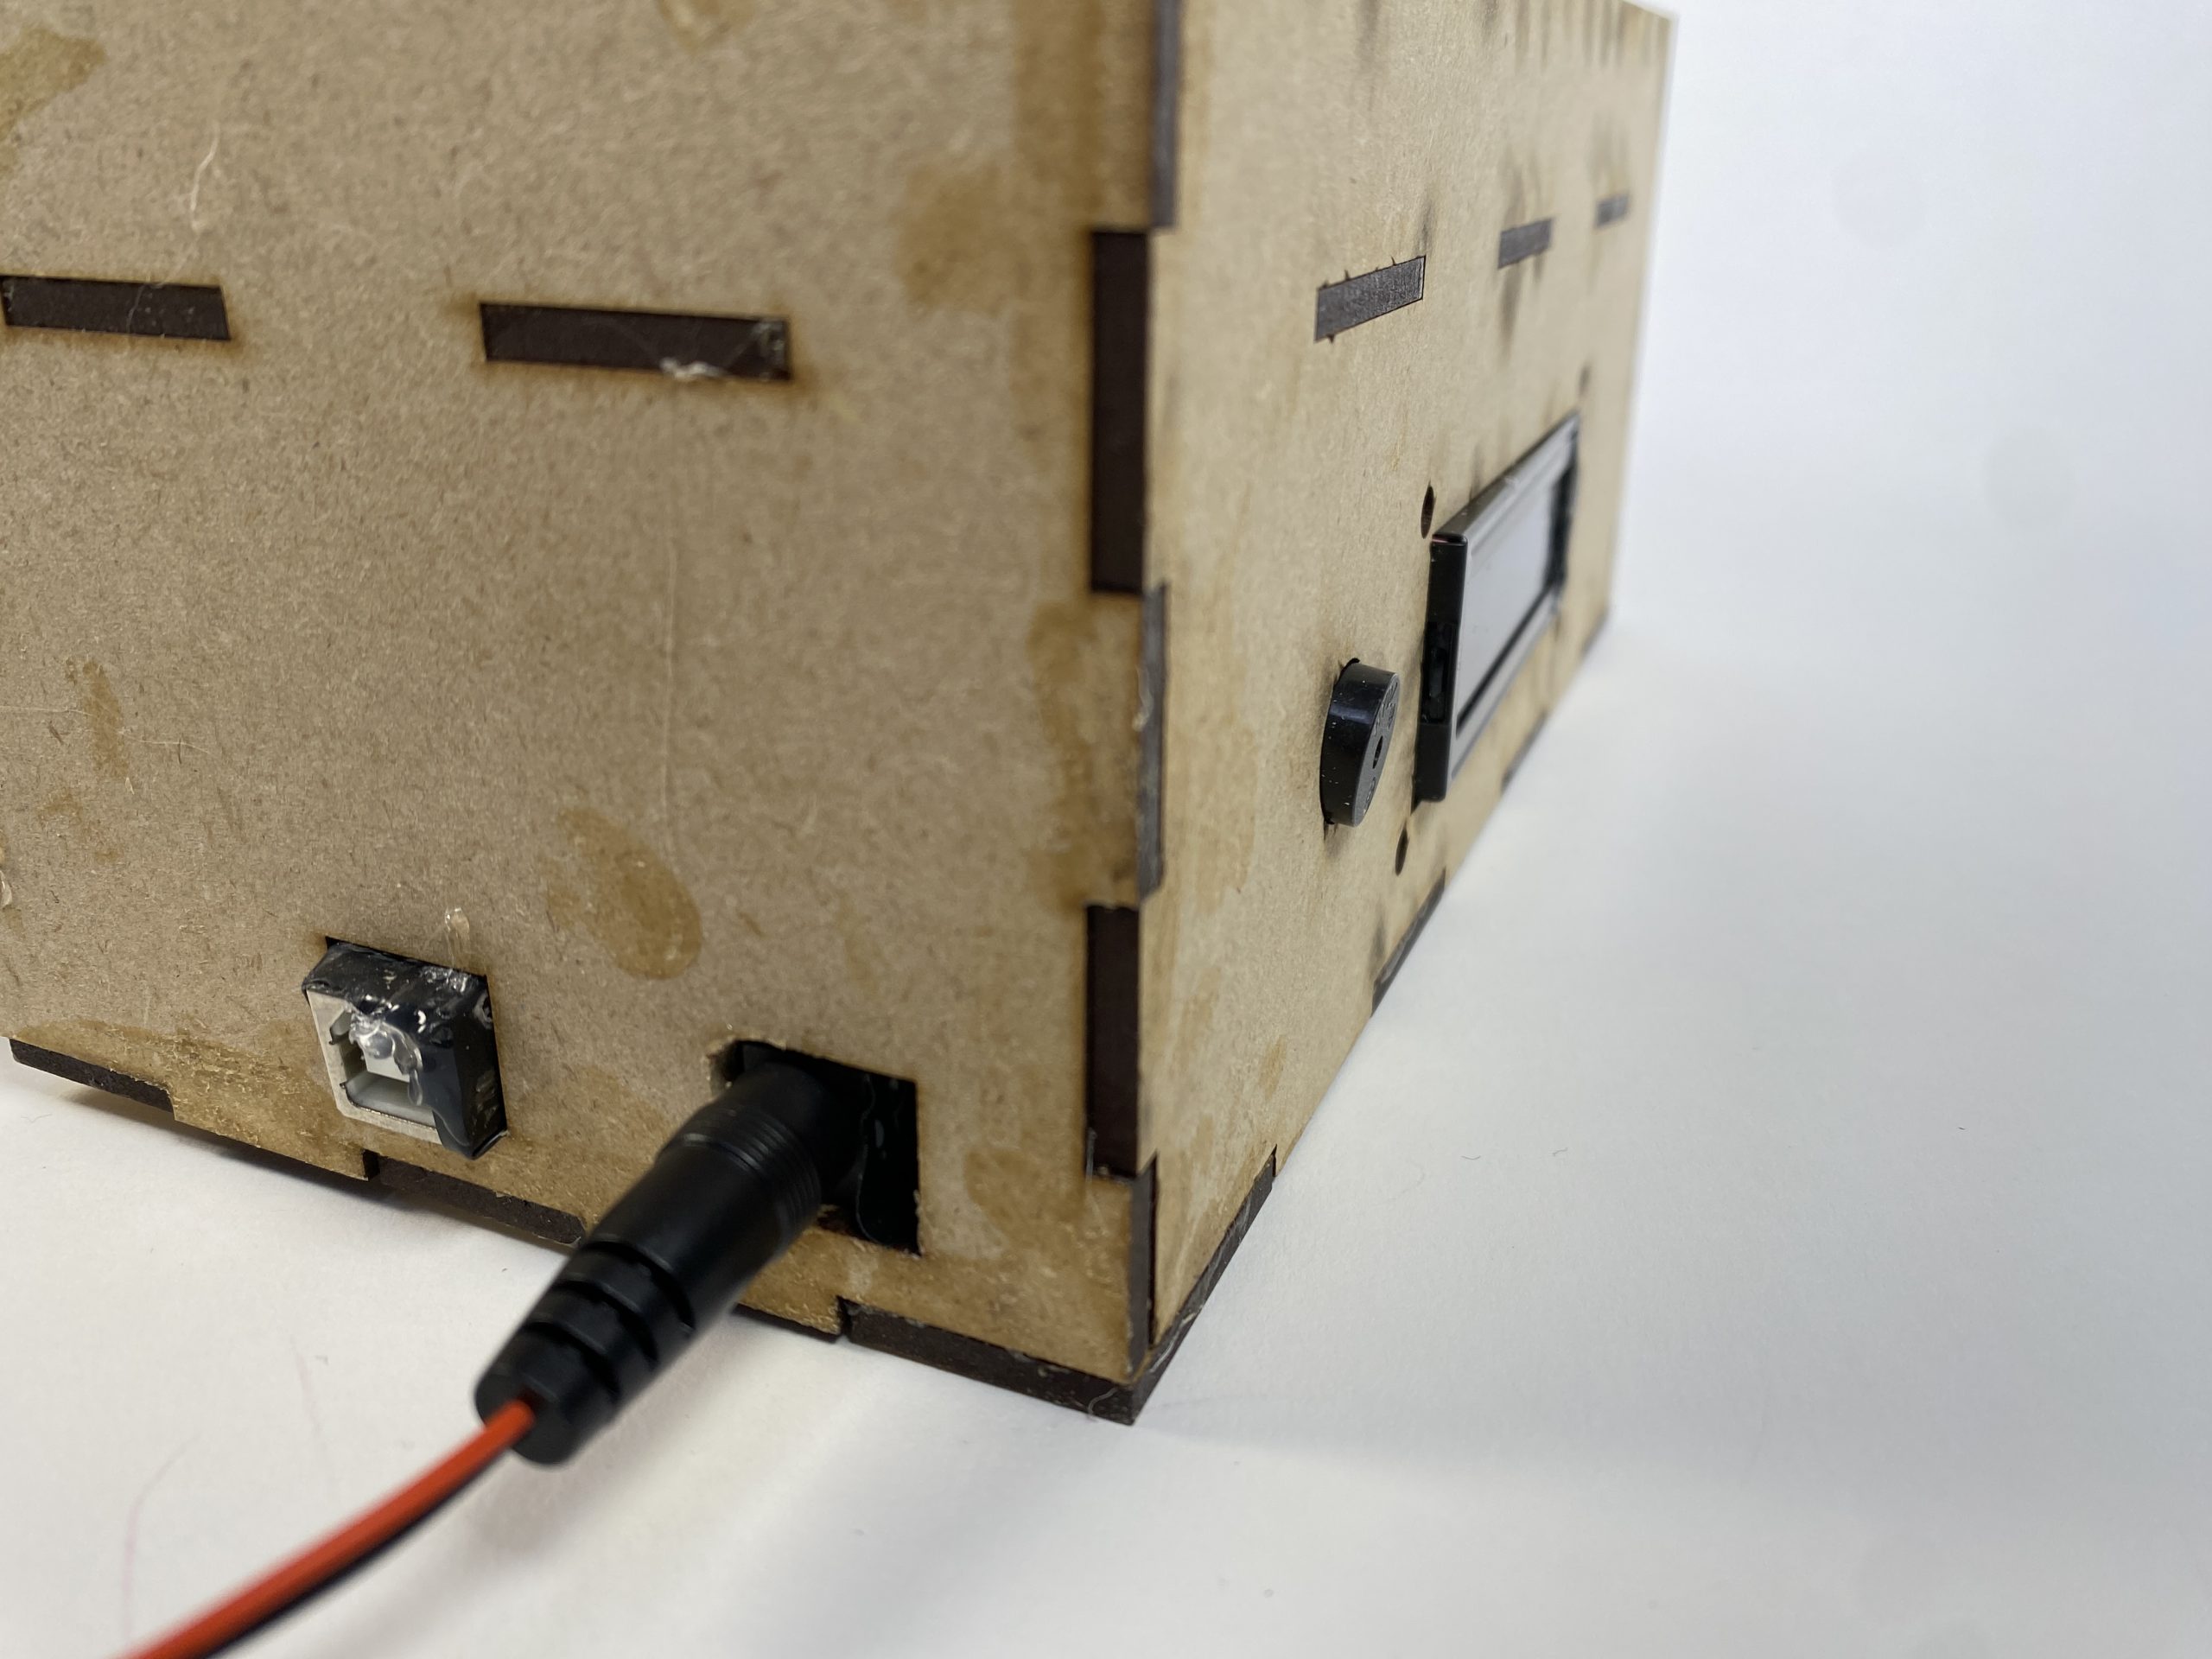 The back-facing view of a wooden box. There are two holes cutout, with a DC jack sticking out & connected to some wires.